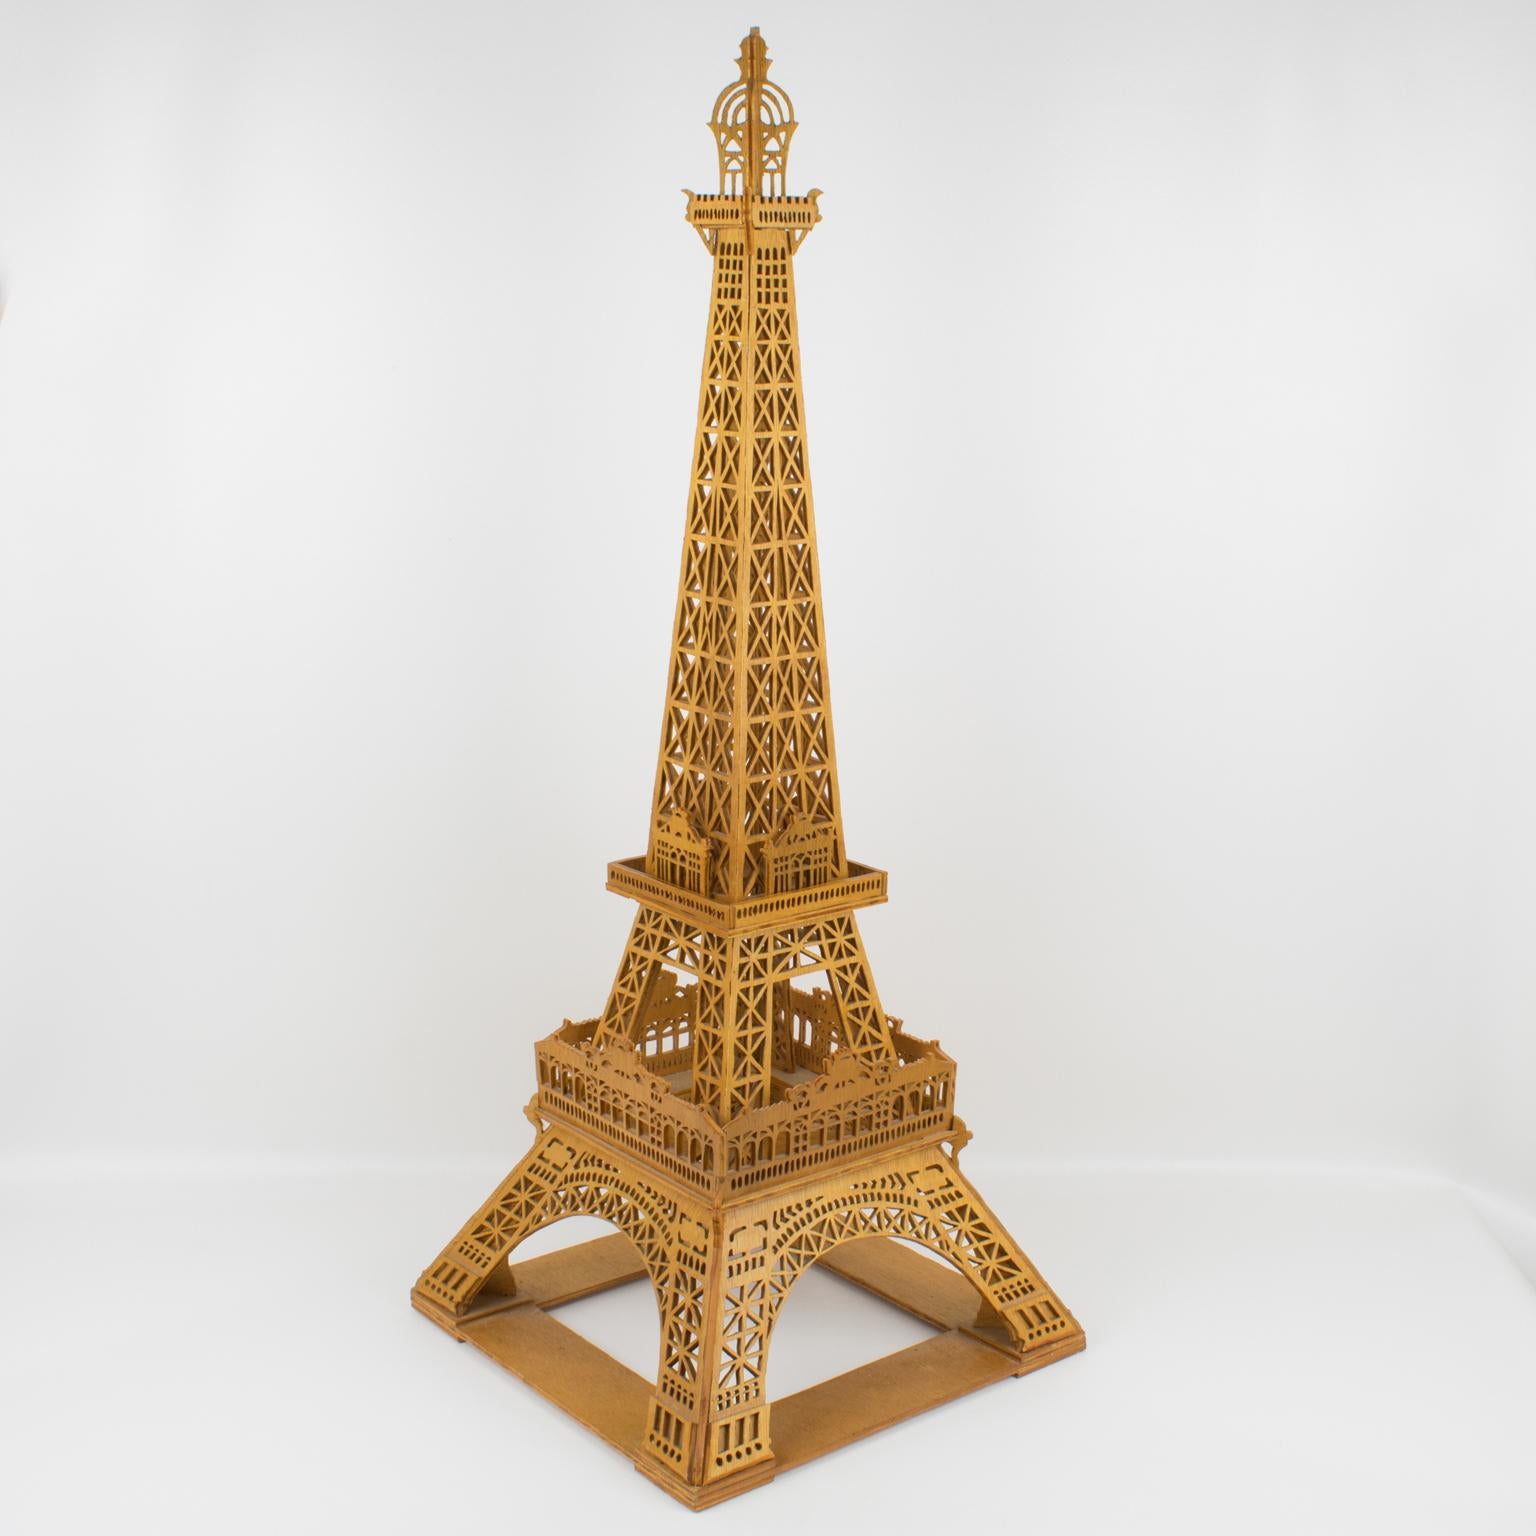 French Hand-Carved Wooden Eiffel Tower Model Miniature Sculpture 15